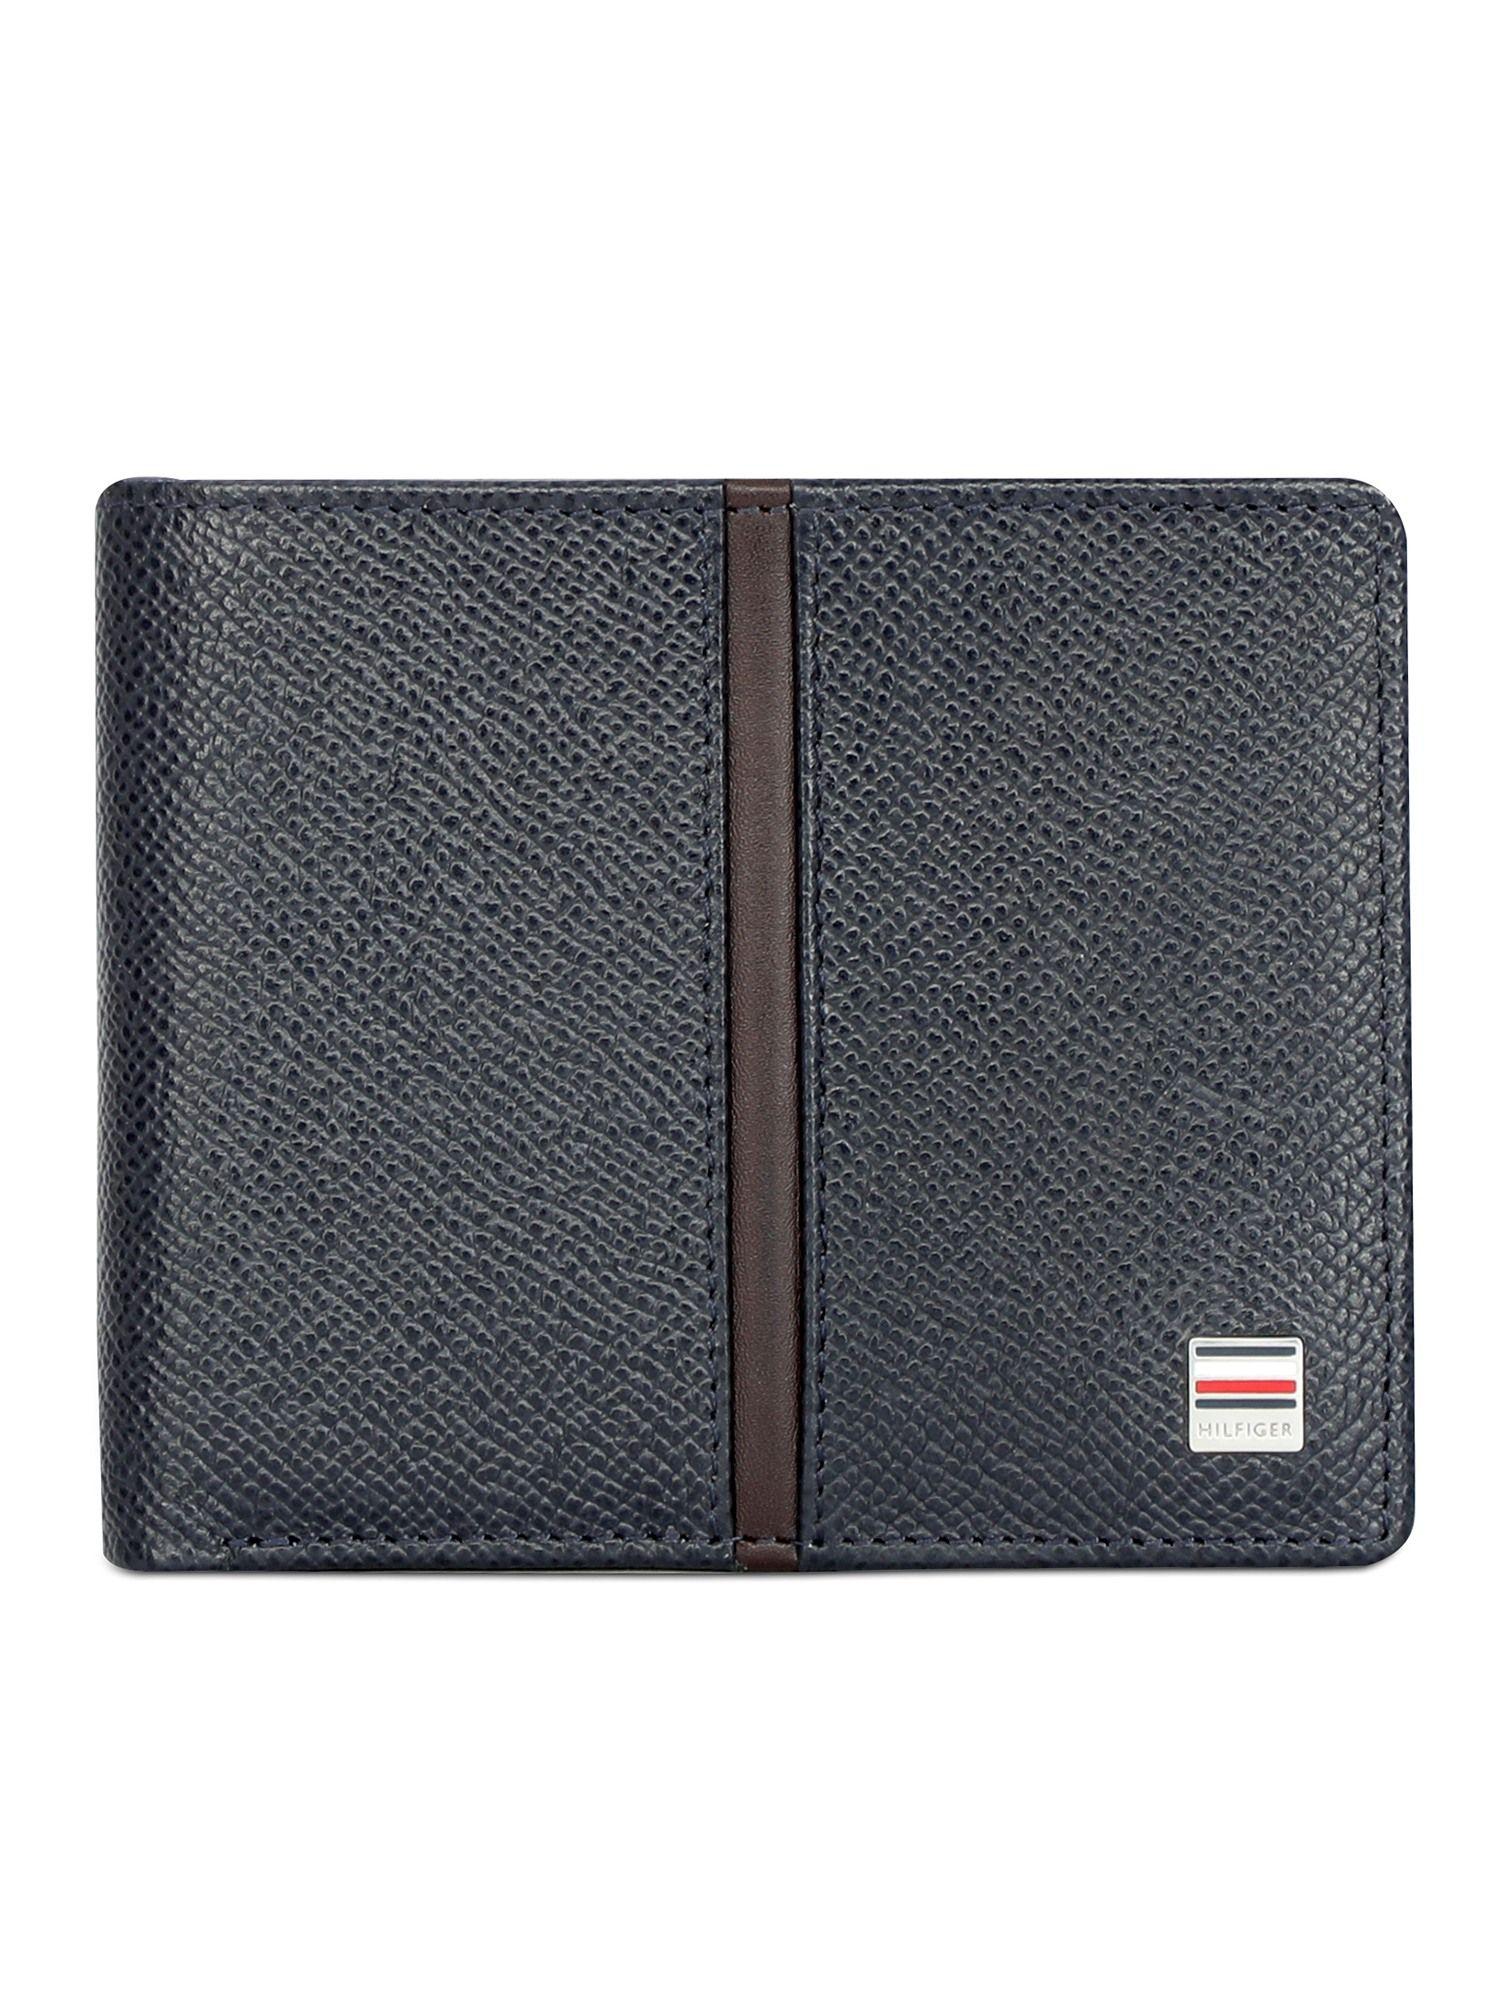 renato-mens-leather-global-coin-wallet-textured-navy-blue